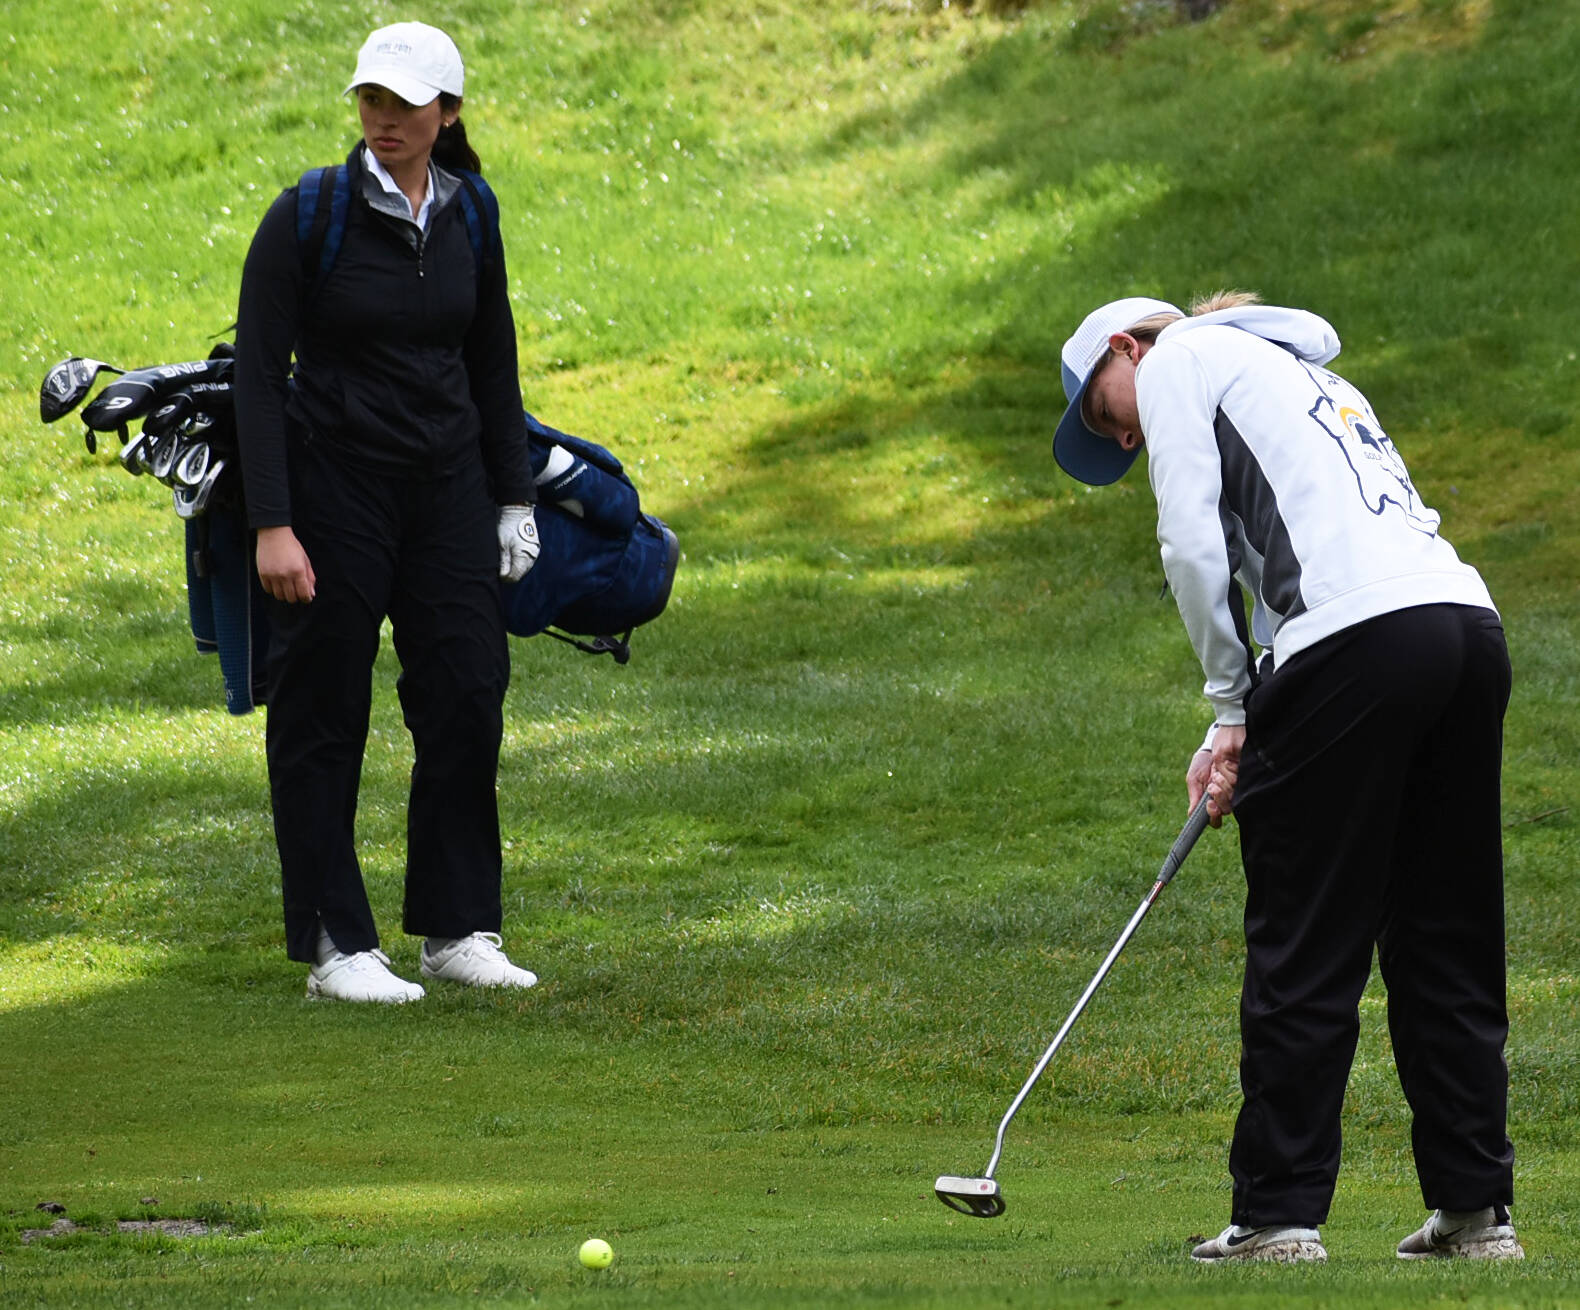 Bainbridge’s Elise Walters puts some power on her putt to make sure it can get through the wet green.